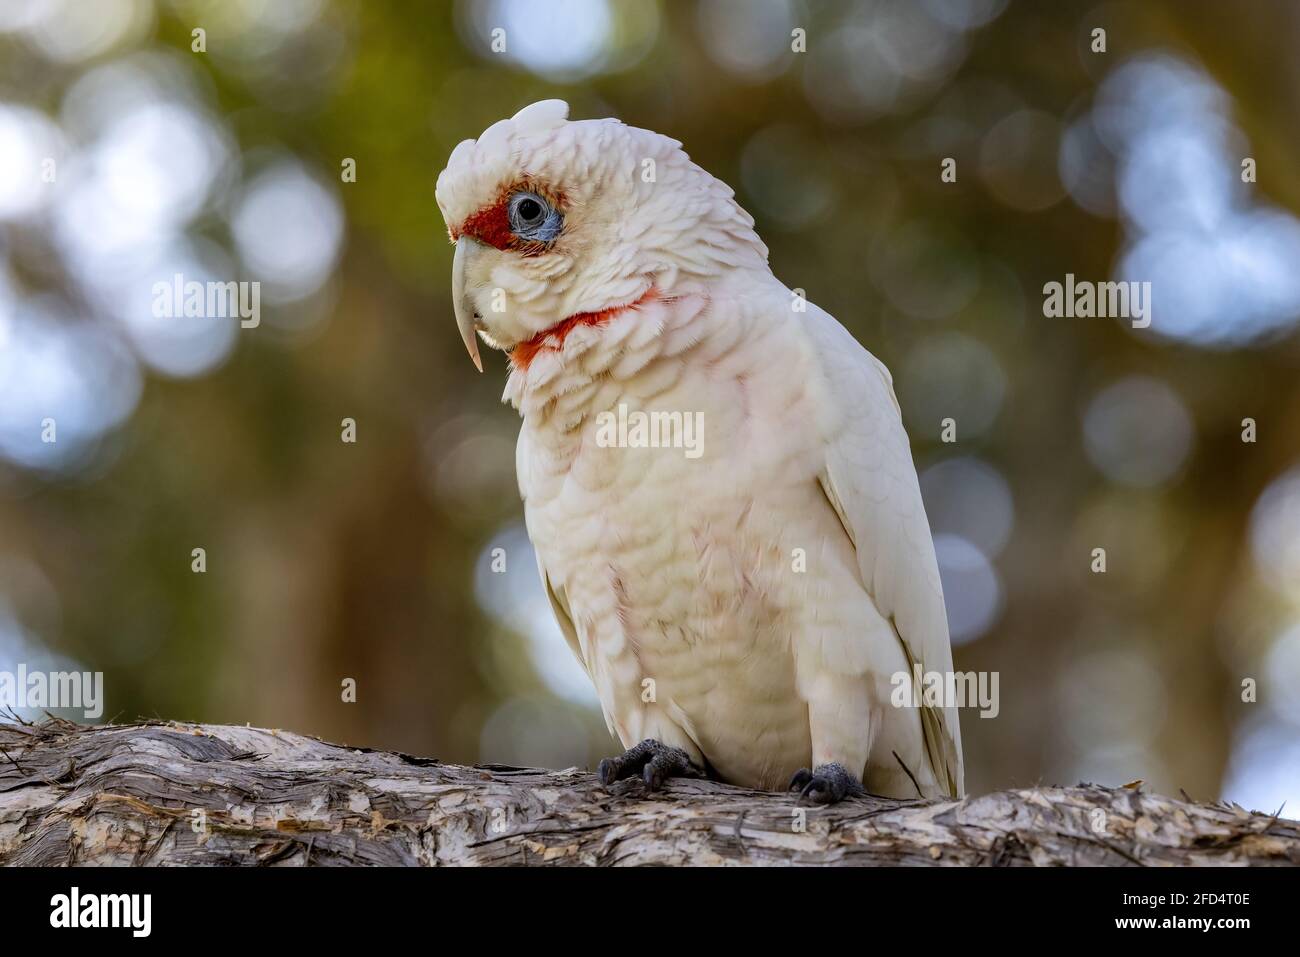 Long-billed Corella perched on tree branch Stock Photo